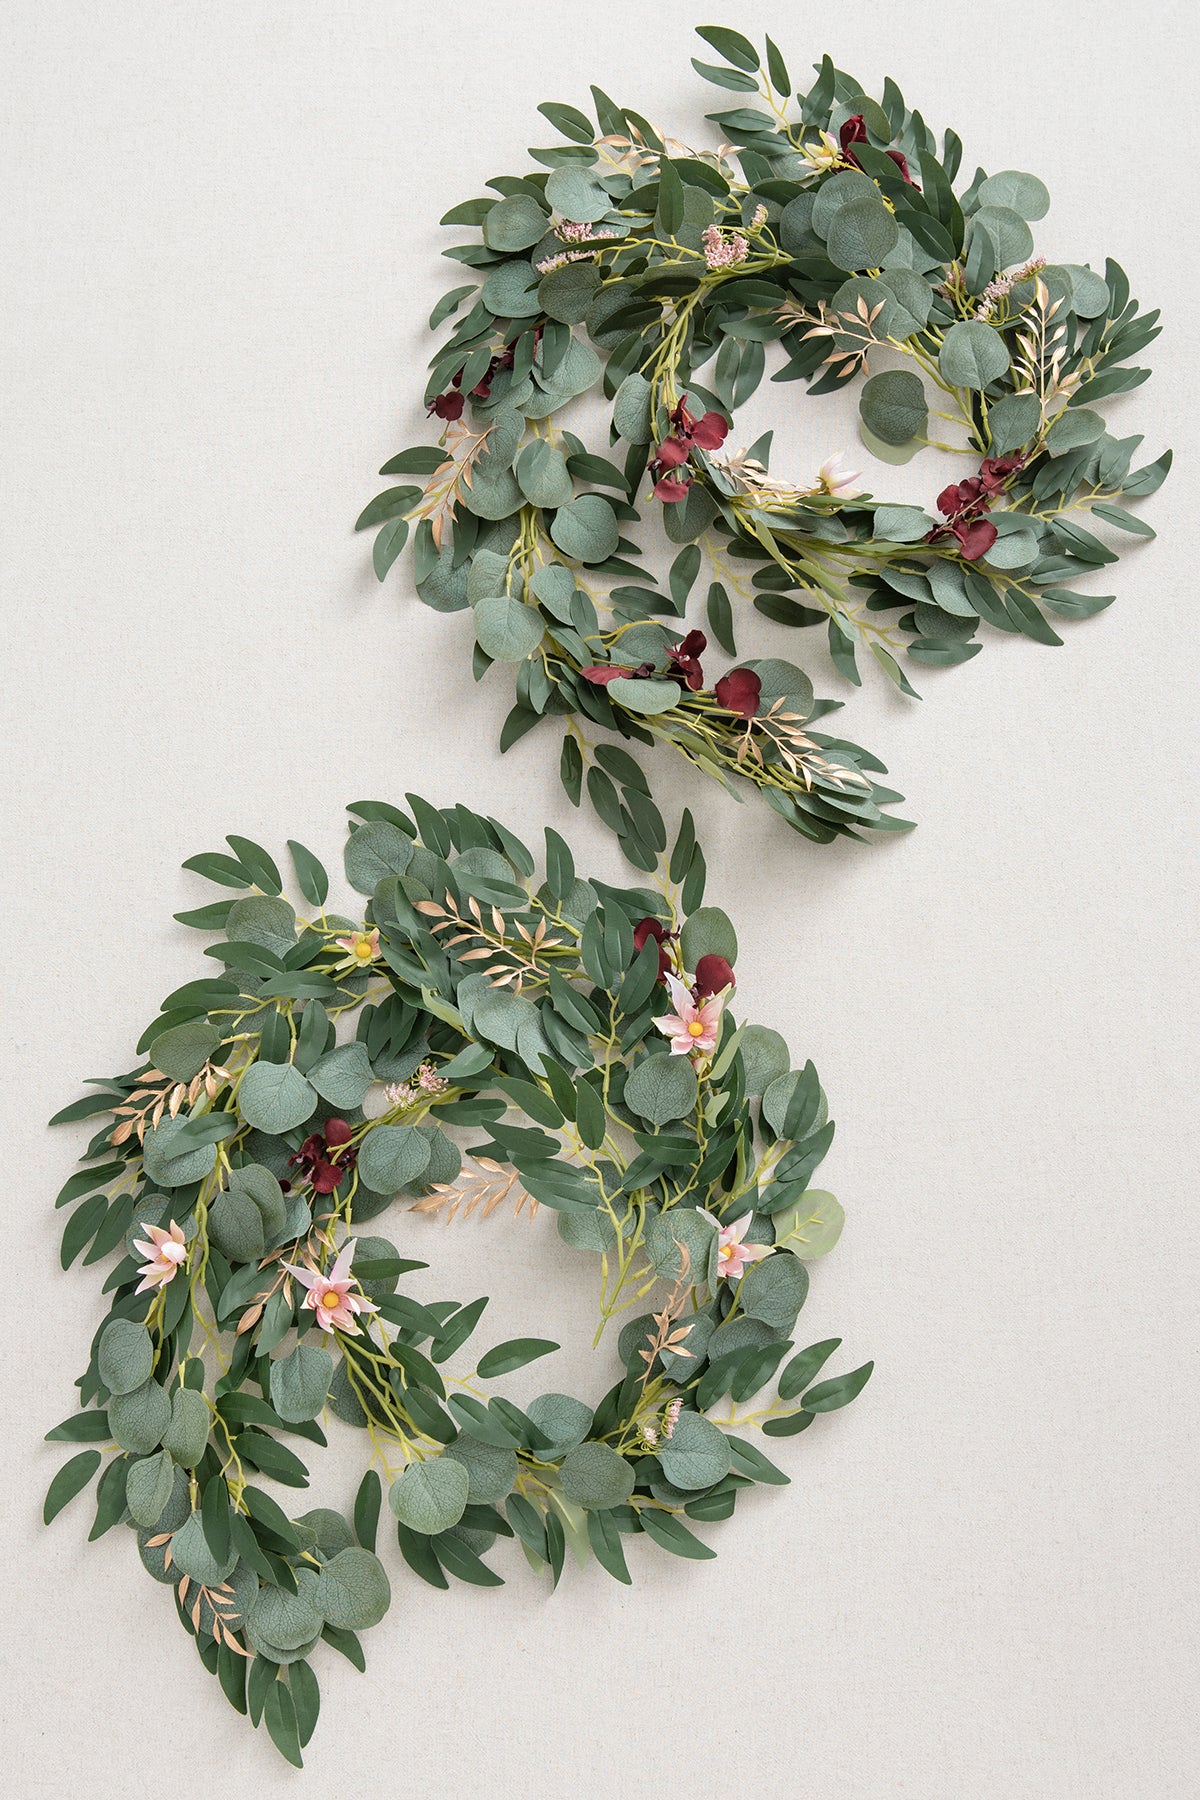 6ft Eucalyptus and Willow Leaf Garlands with Filler Flowers in Marsala